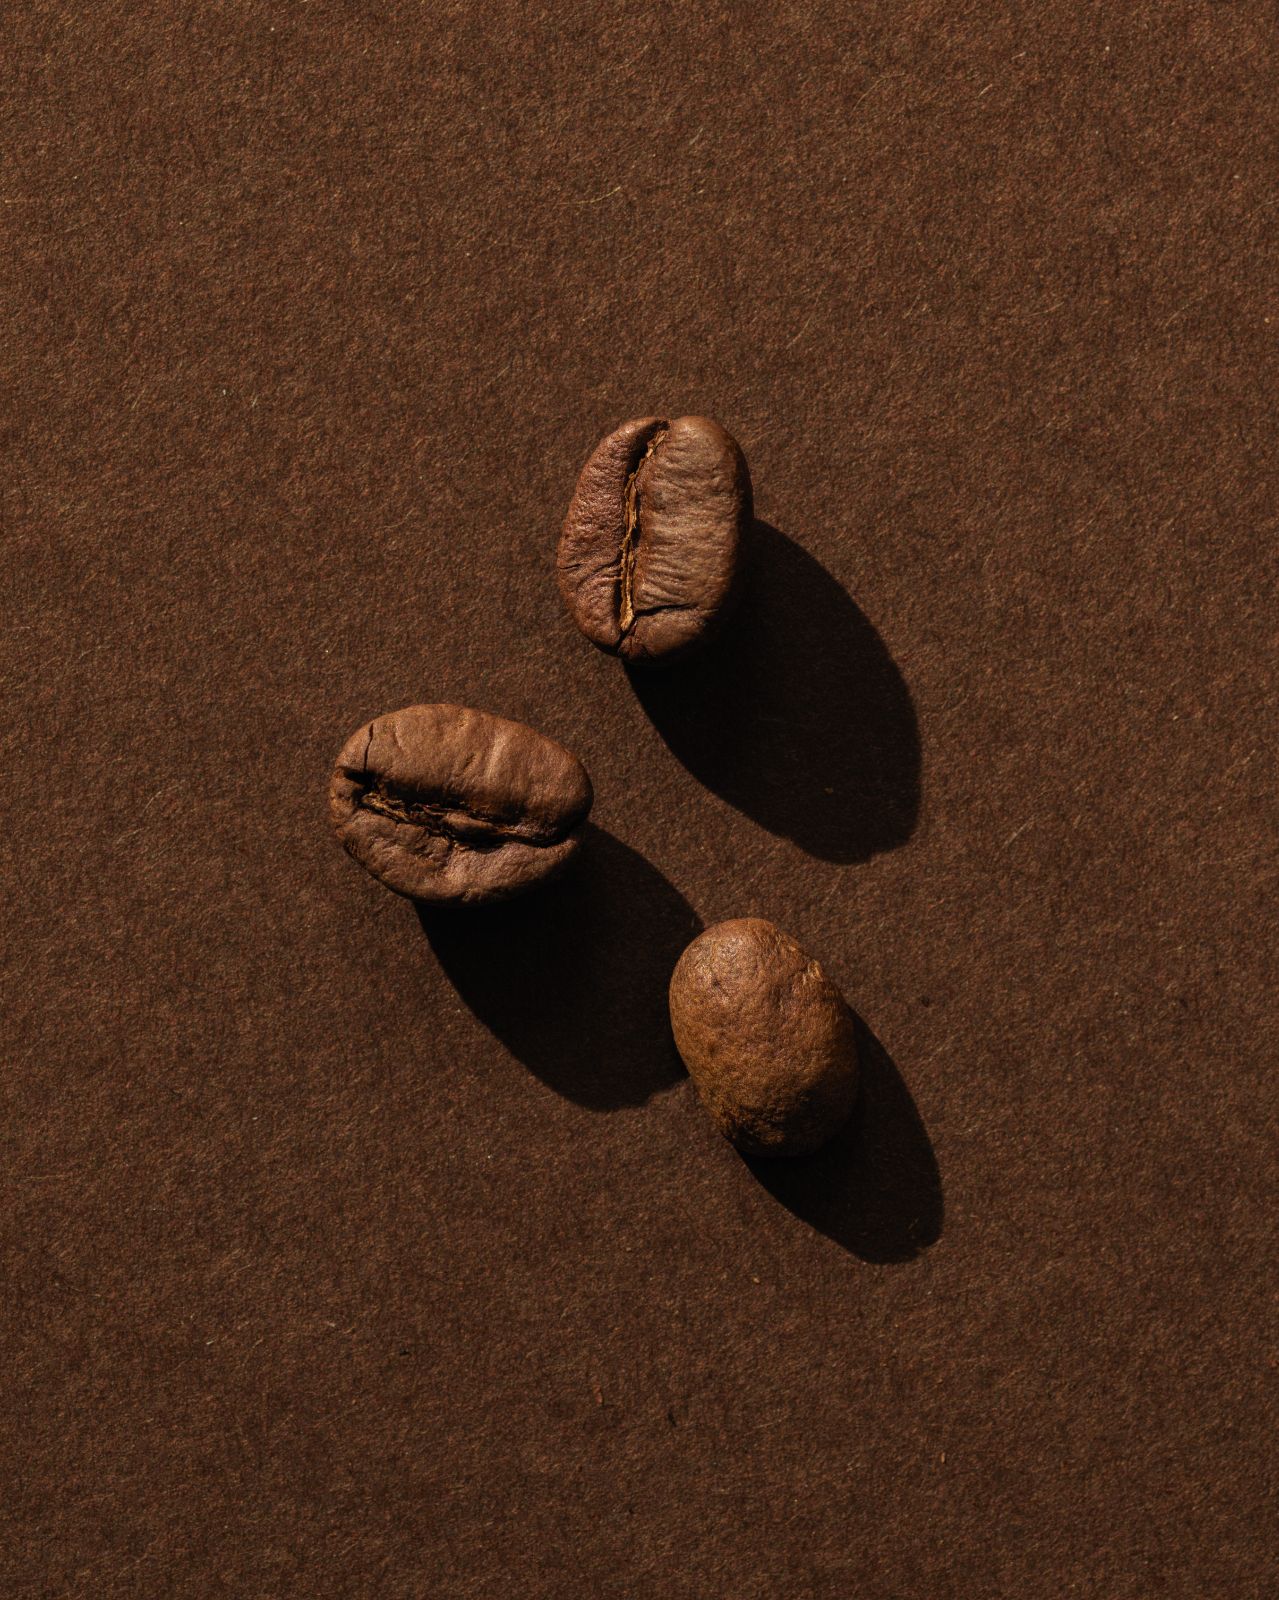 A close up of three Dark woods roasted coffee beans on a dark brown background. Warm still life lighting and shadows.